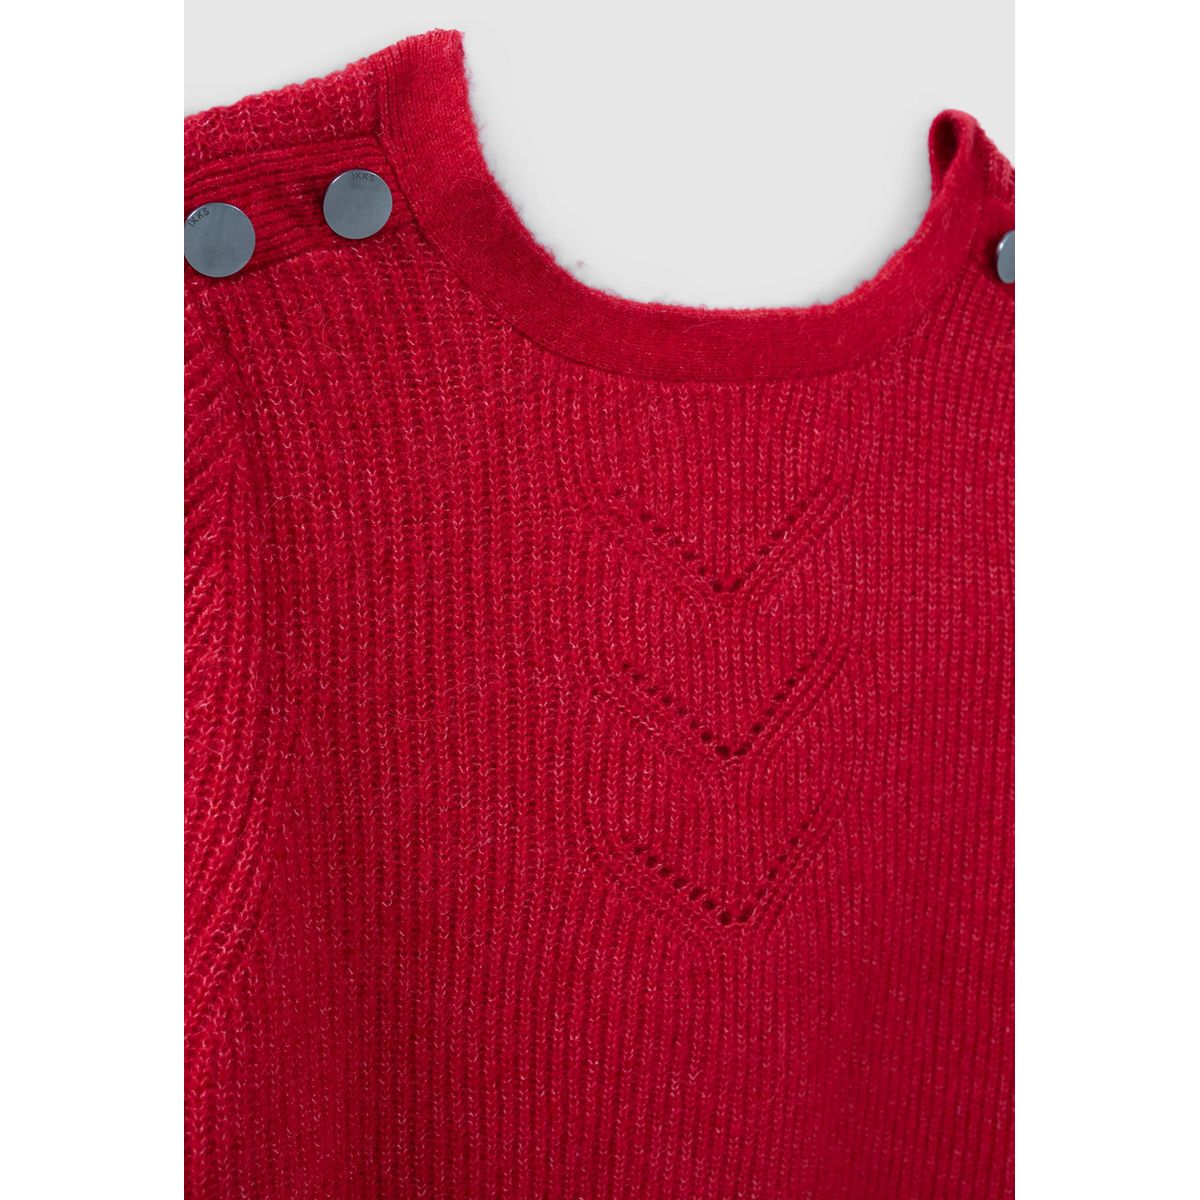 Pull rouge tricot noeud fixe au dos Femme